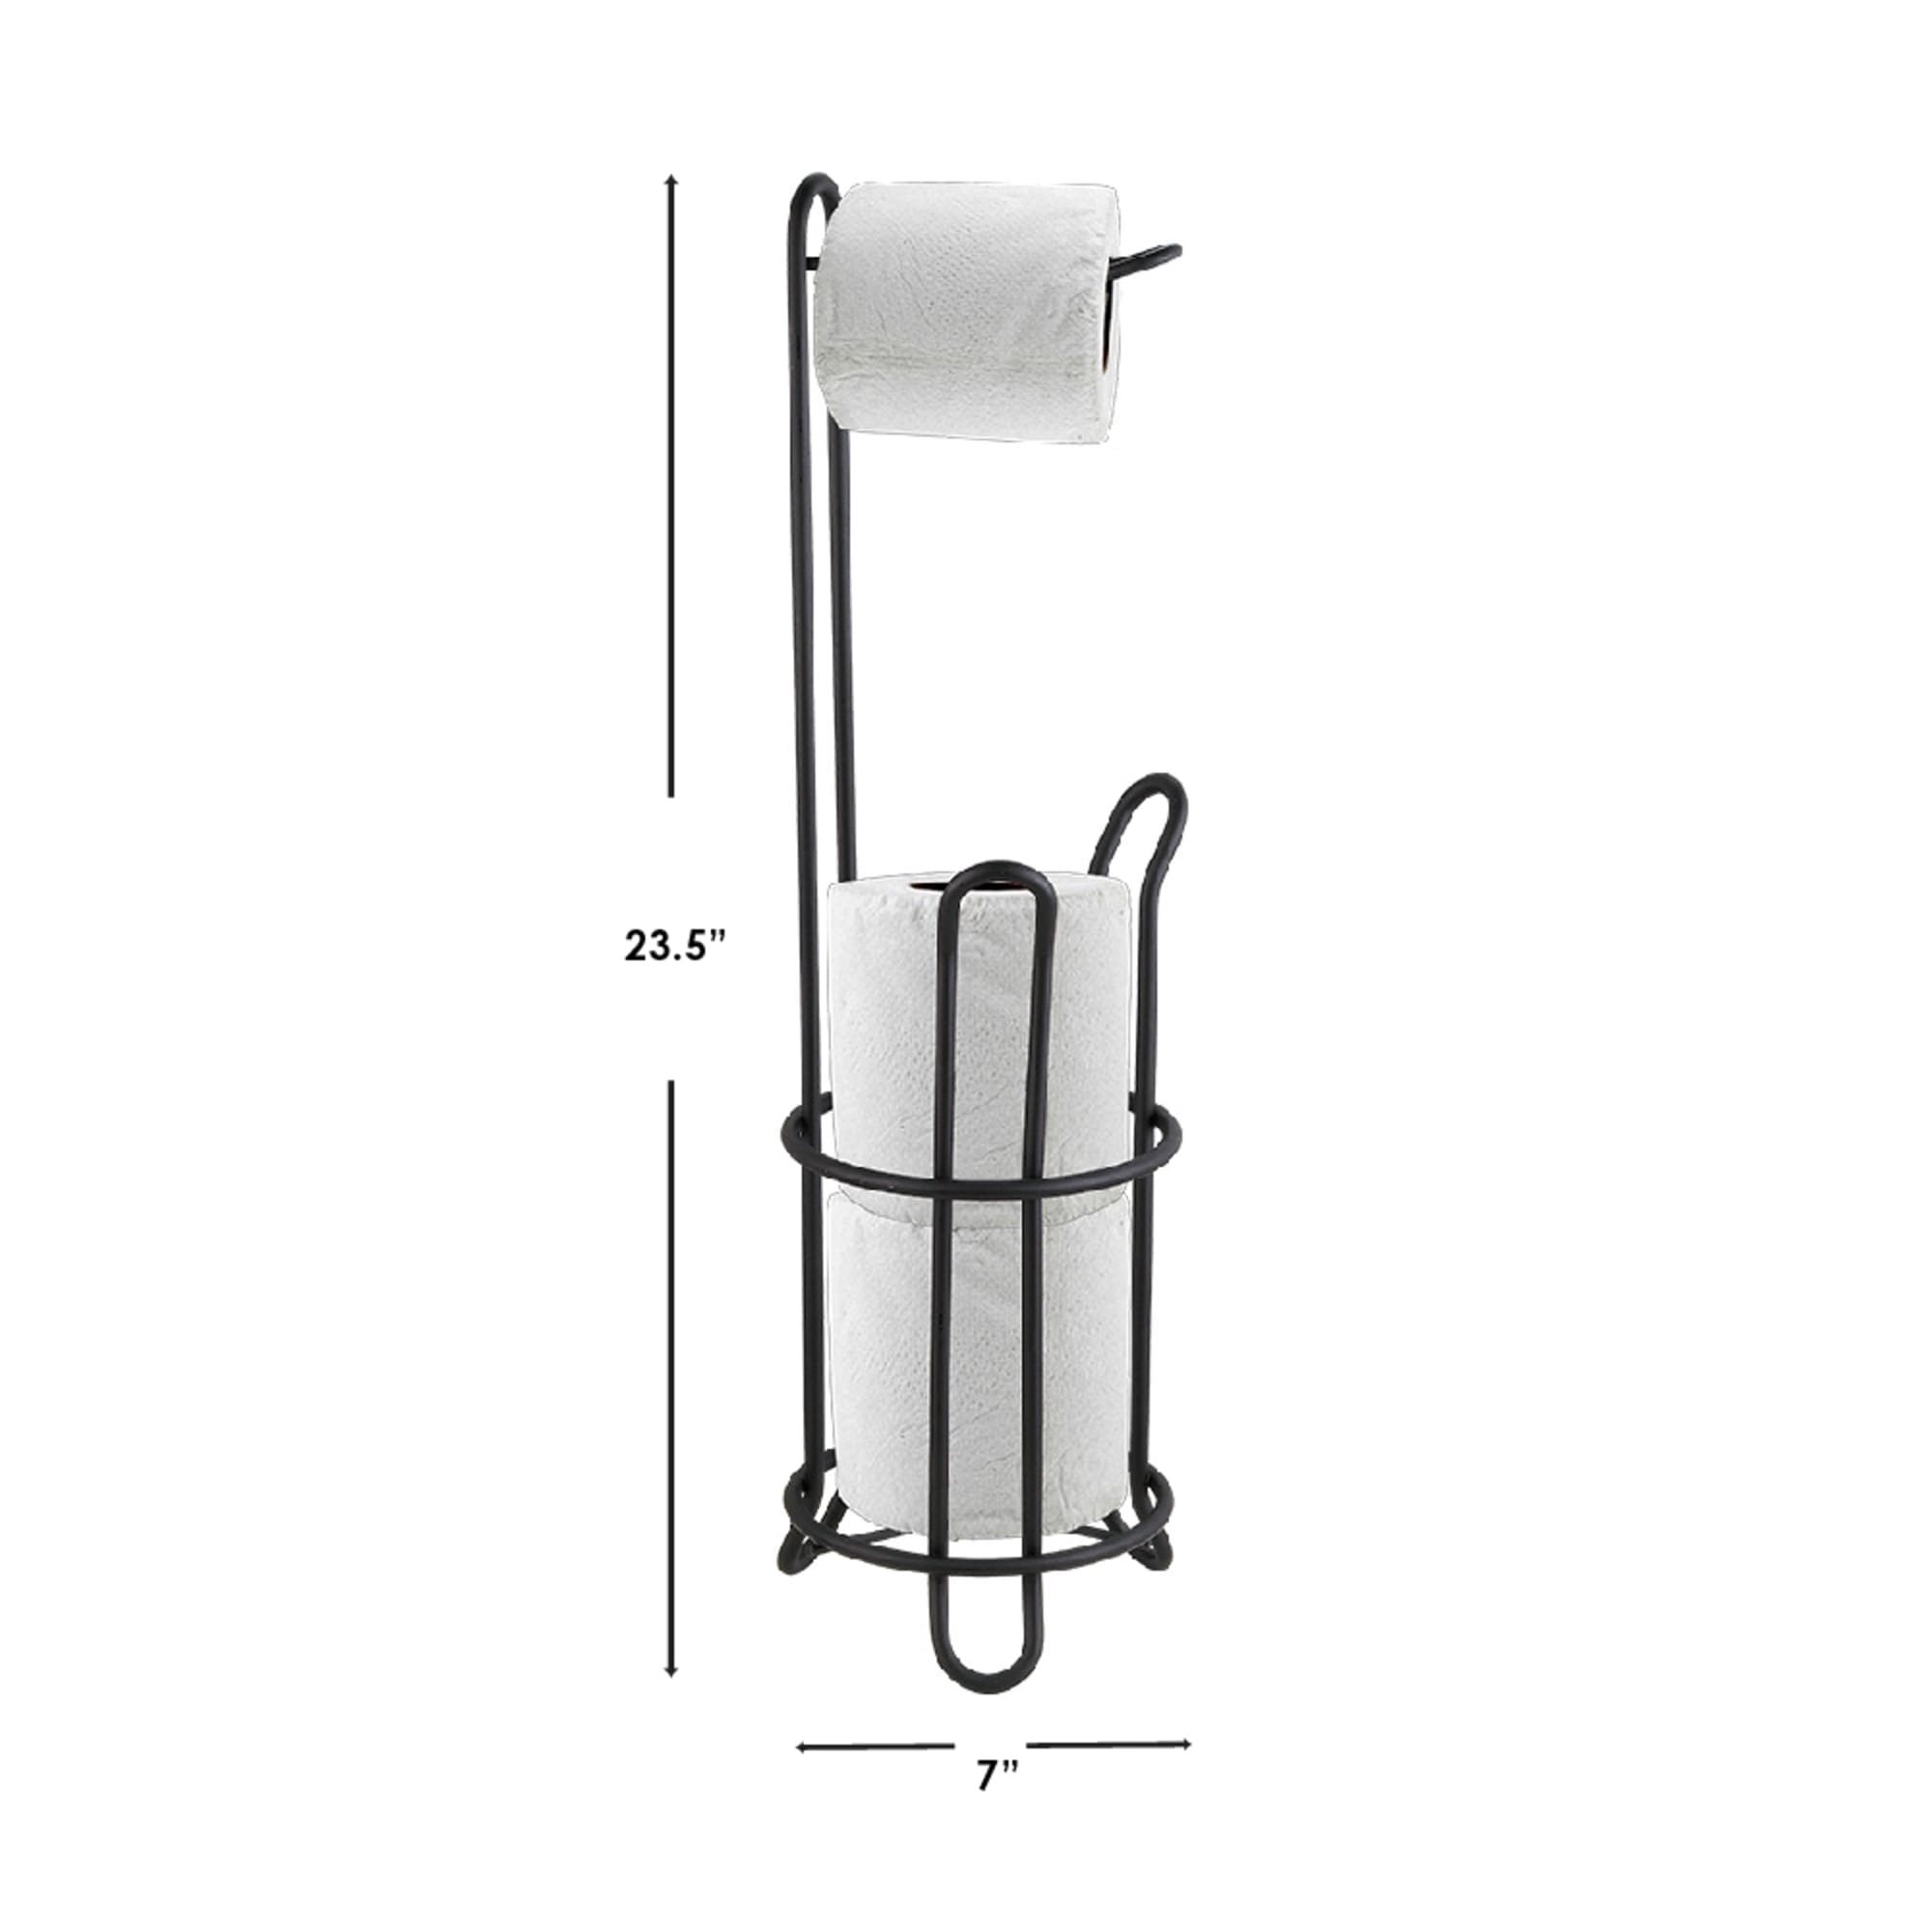 Home Basics Black Metal Heavy Duty Toilet Paper Holder with Dispensing Top $10.00 EACH, CASE PACK OF 6